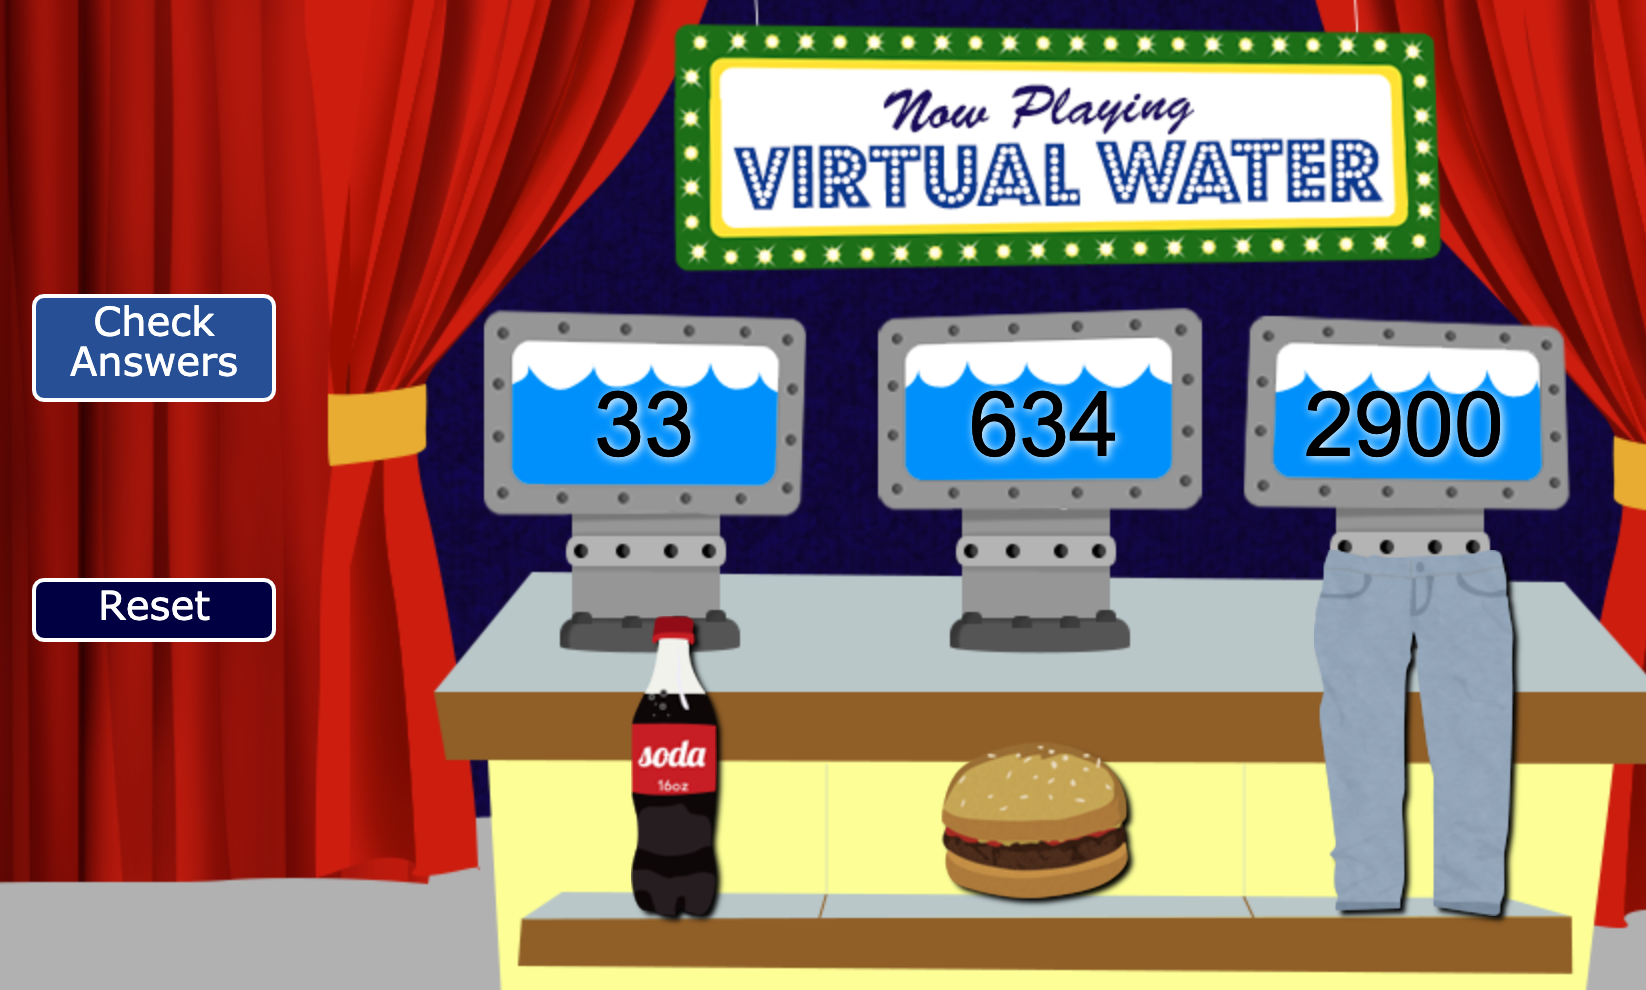 The water interactive game helps people choose which household items use the least water to produce.